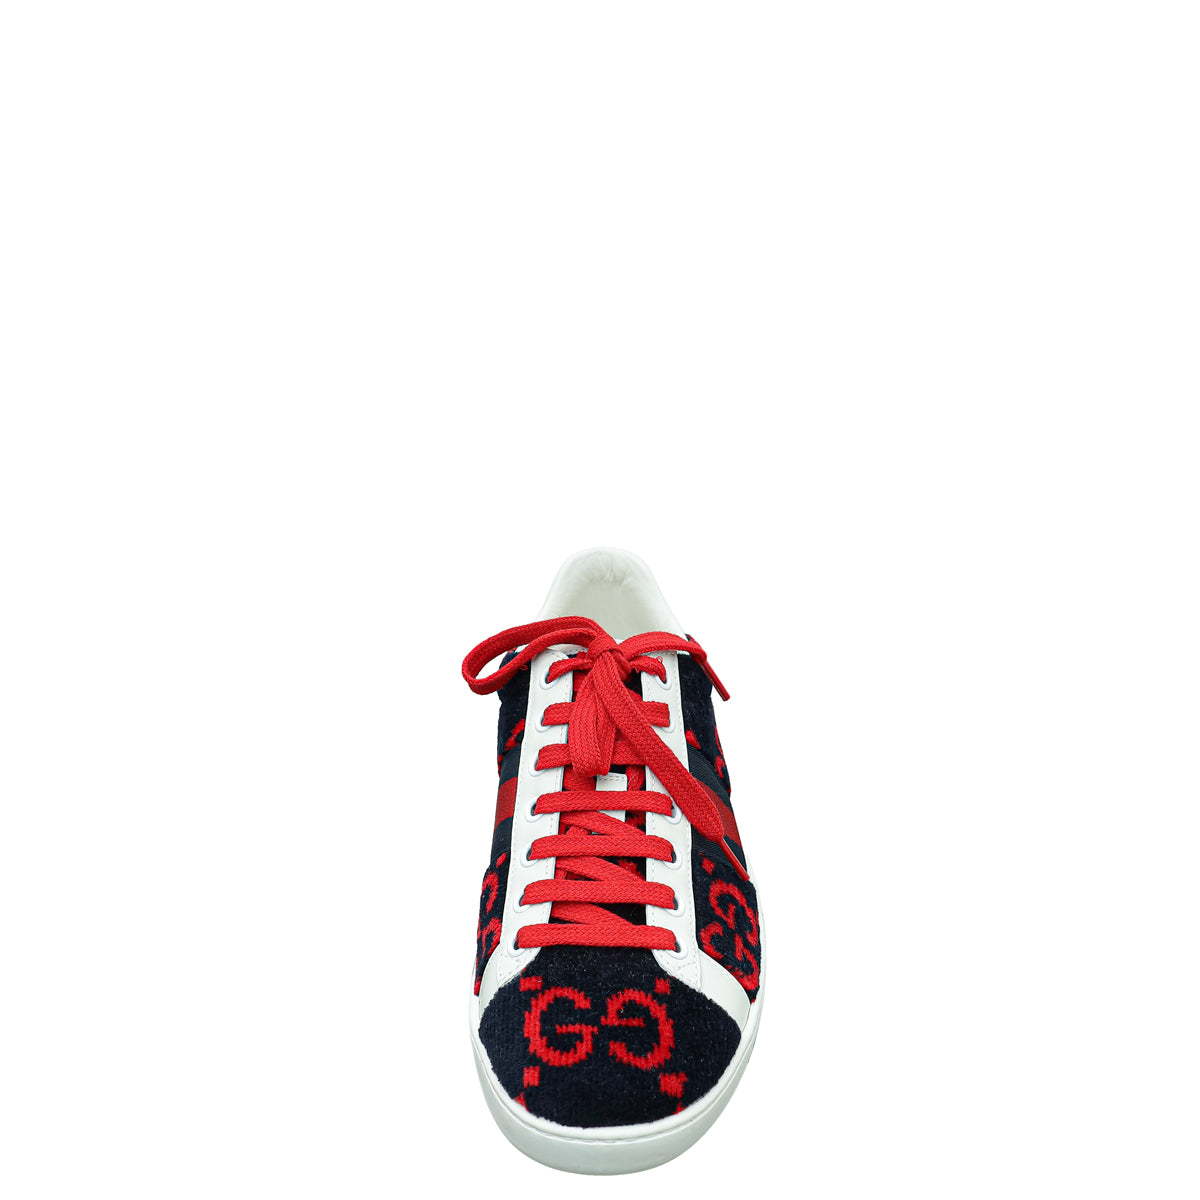 Gucci Bicolor GG Terry Cloth Web Ace Sneakers 36.5